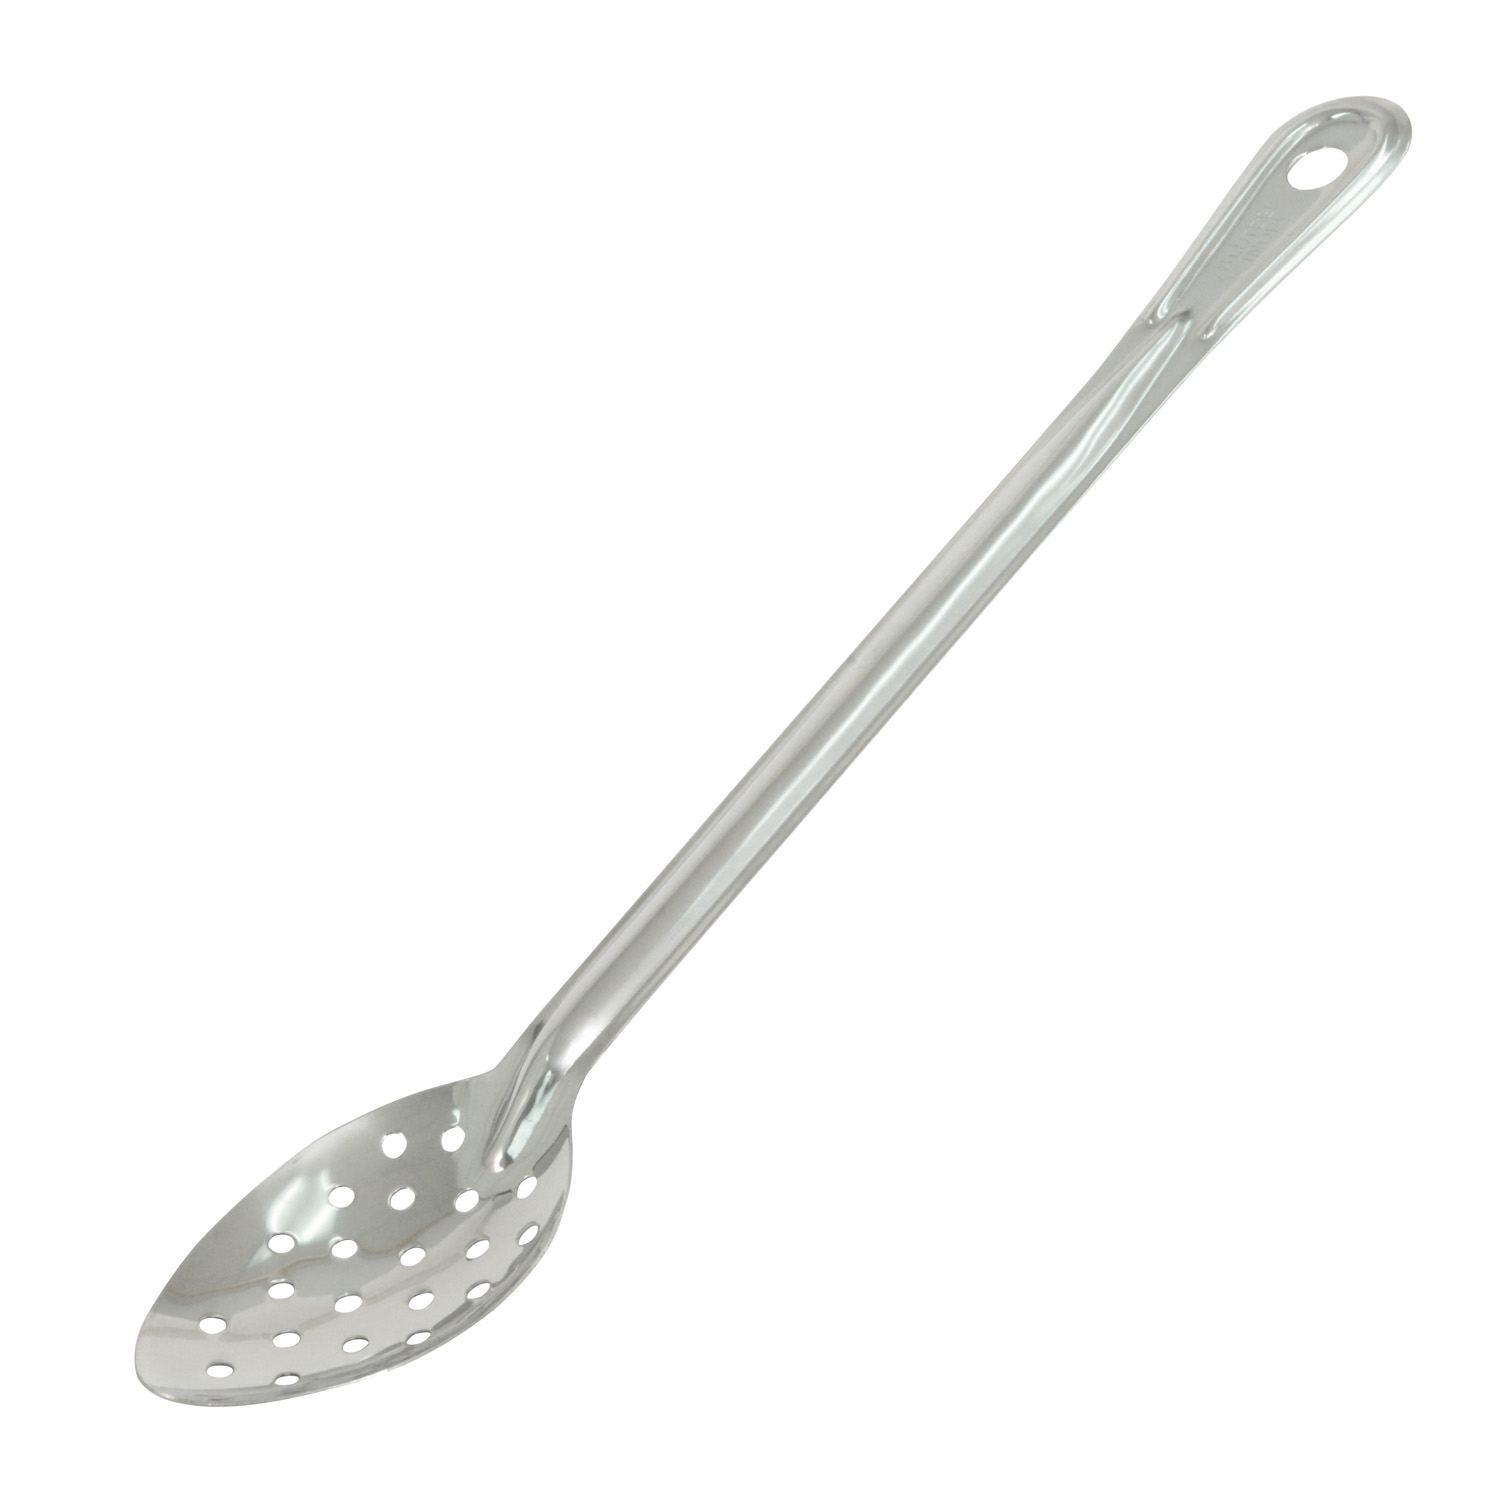 CAC China SBSP-18 Perforated Stainless Steel Basting Spoon 1.5mm 18"